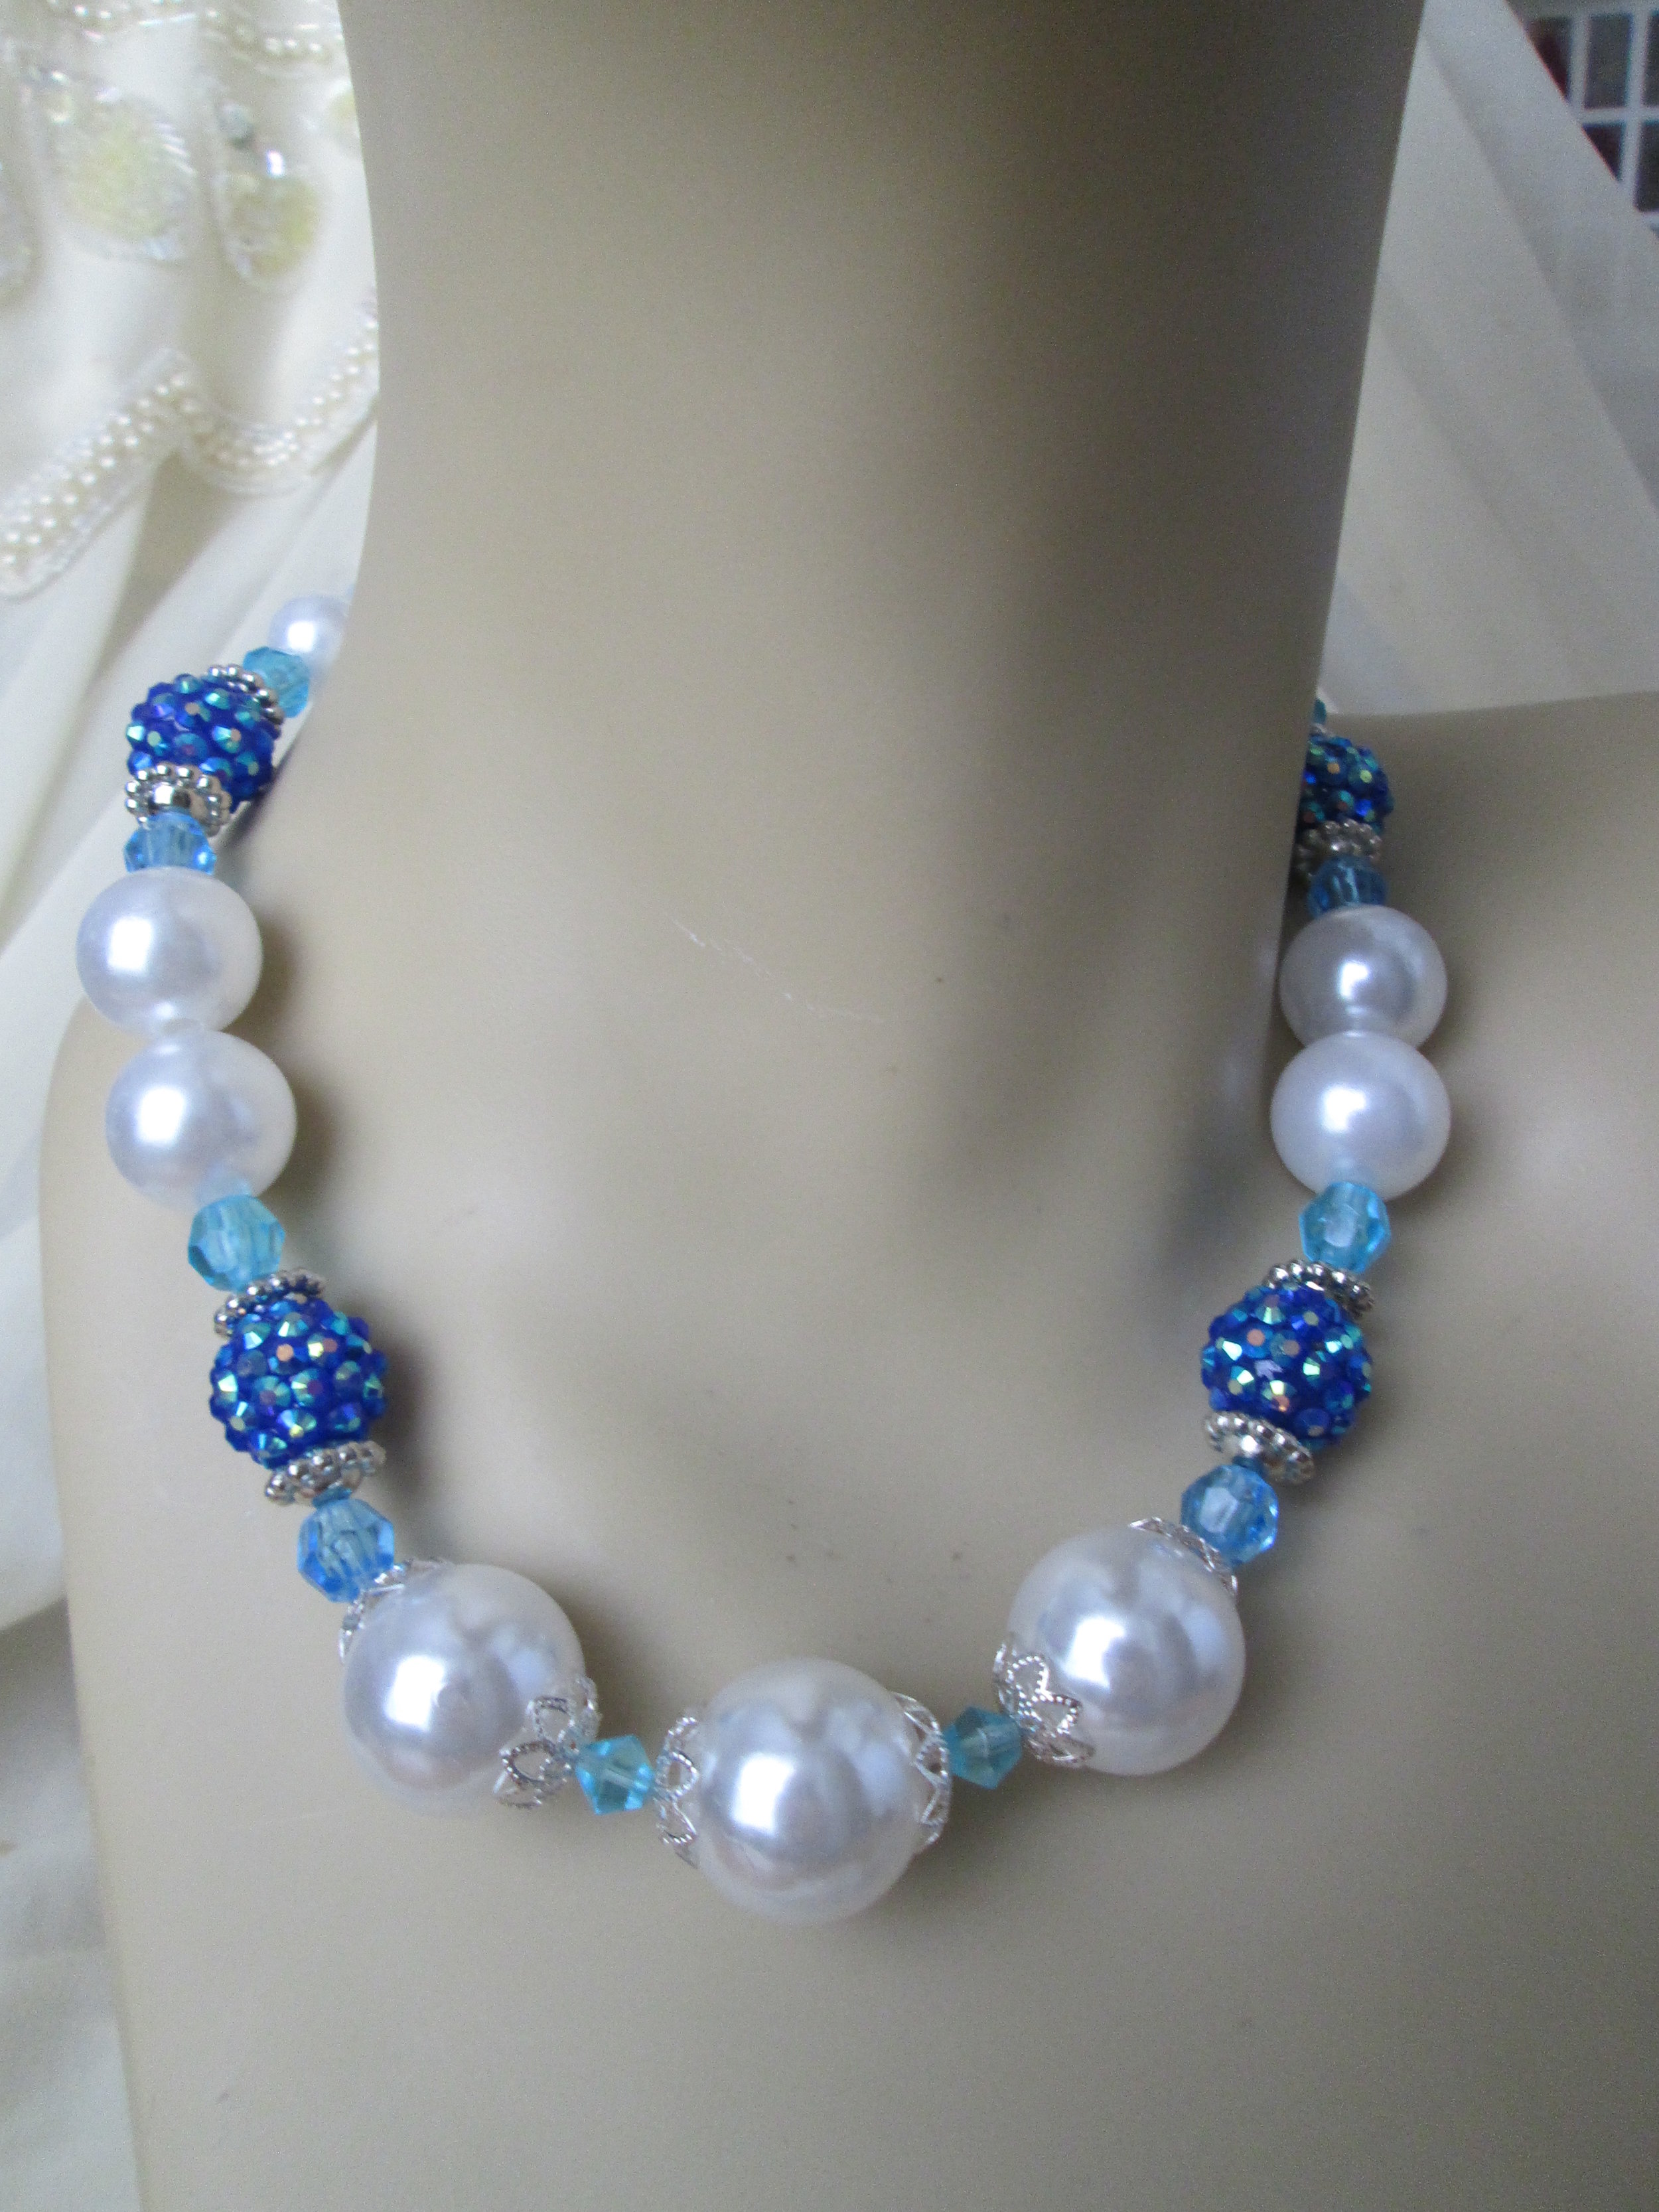 Handmade beaded necklaces by JMB Designs